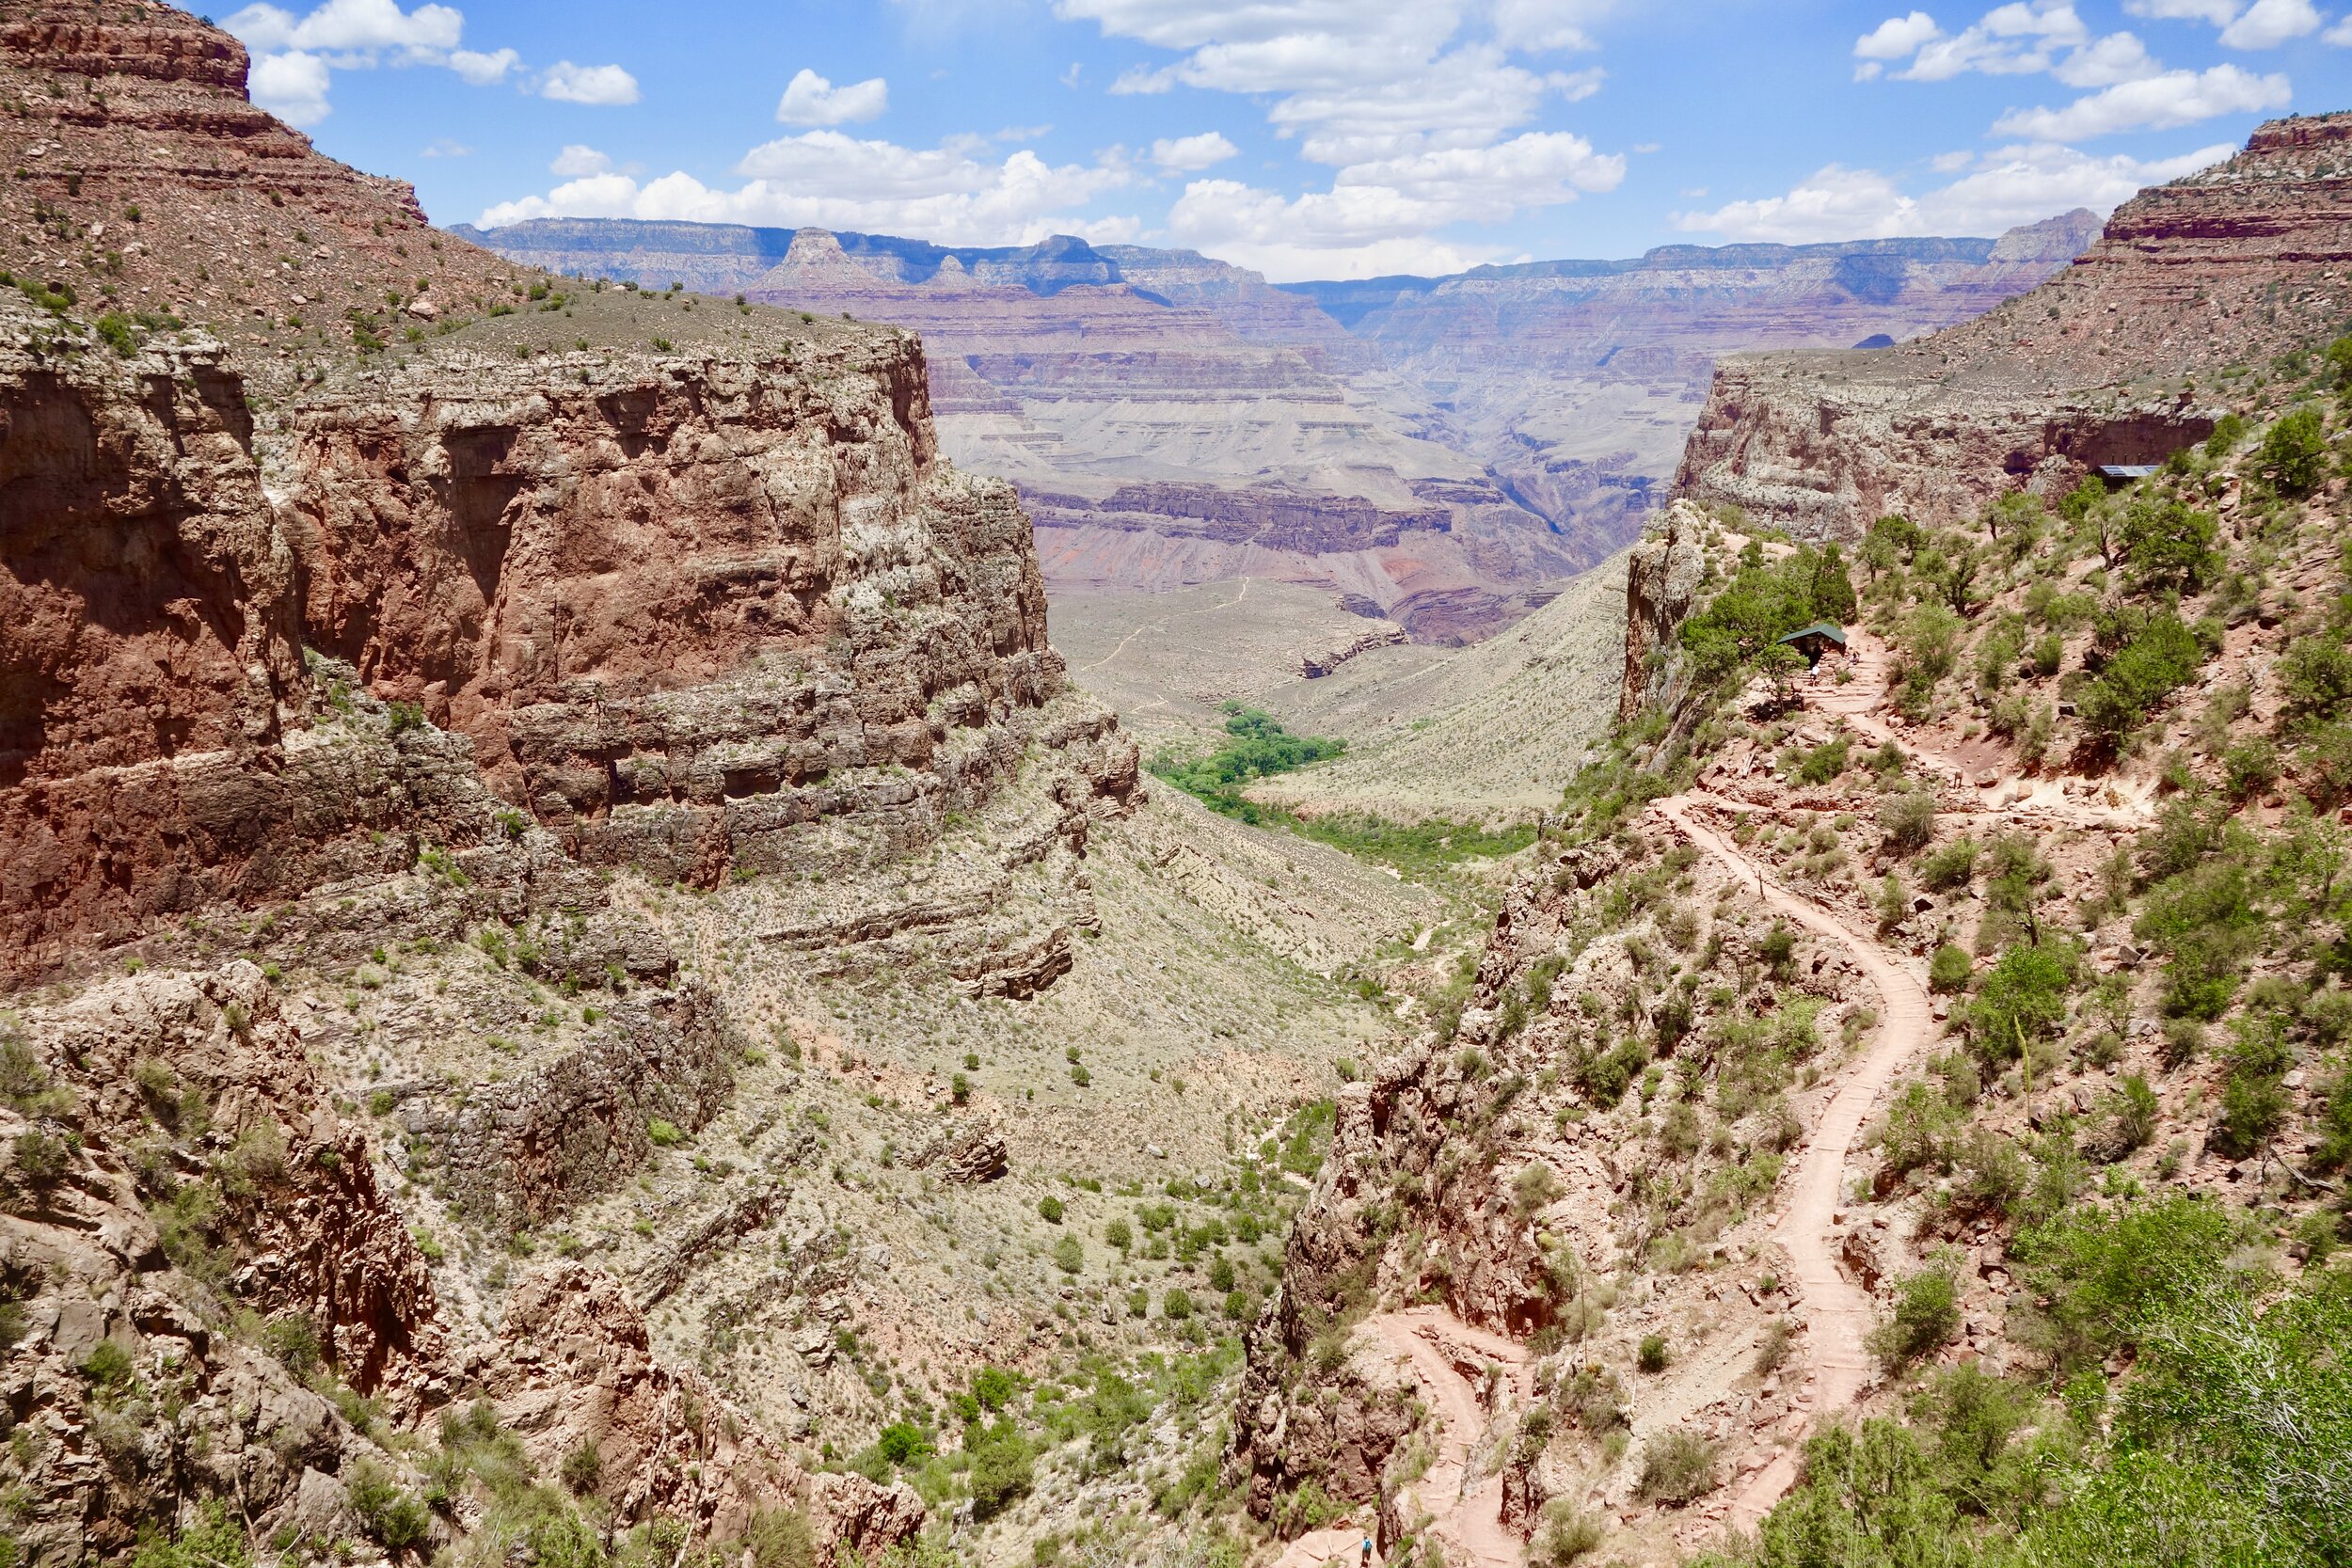 The Bright Angel Trail is one of the most storied and iconic trails in all the US national parks.